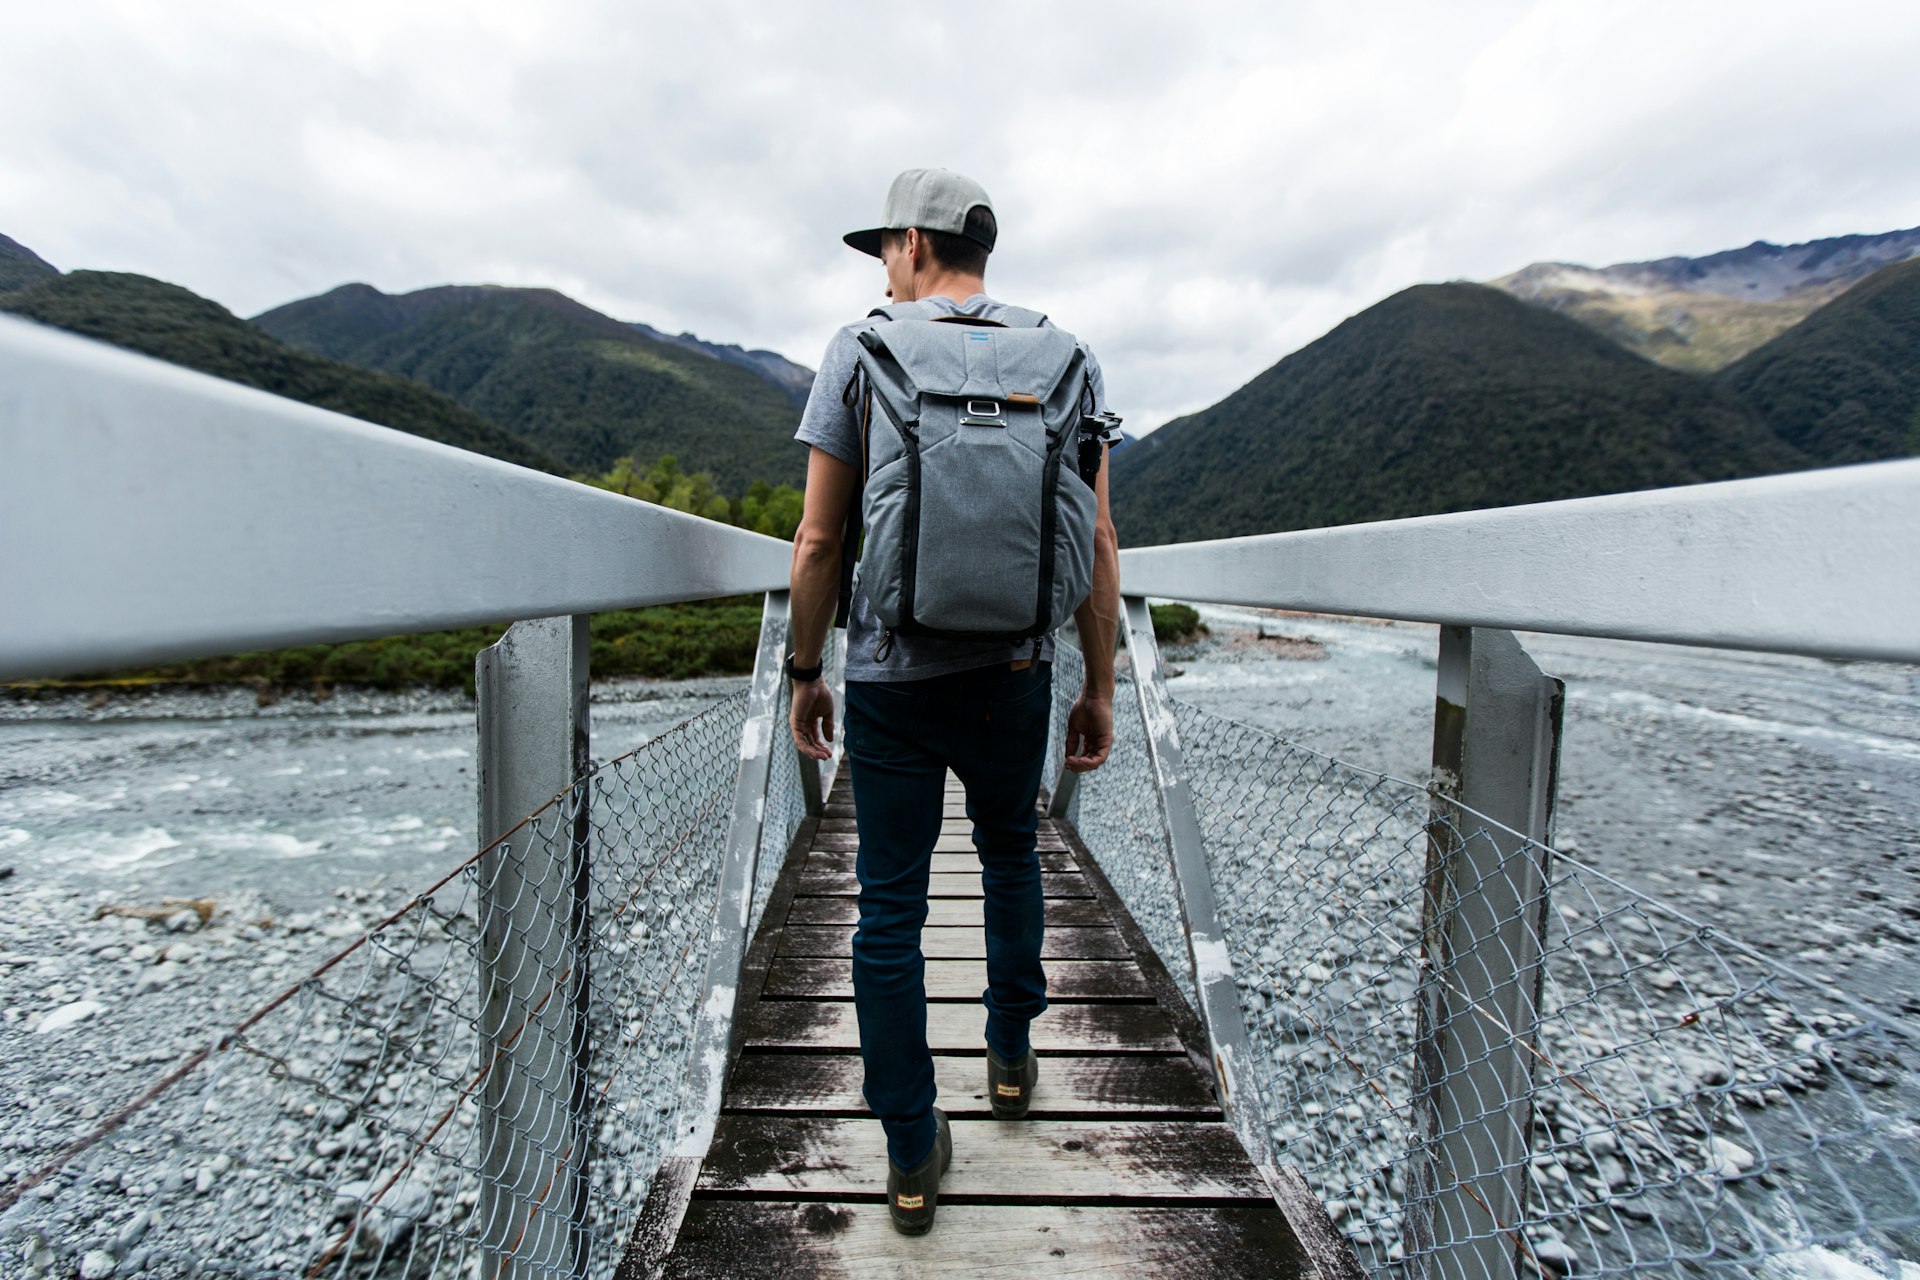 A man wearing an Everyday backpack is going across a walkway with wooden rails. The ground either side of him is covered in gravel, mountains are in the near distance. 